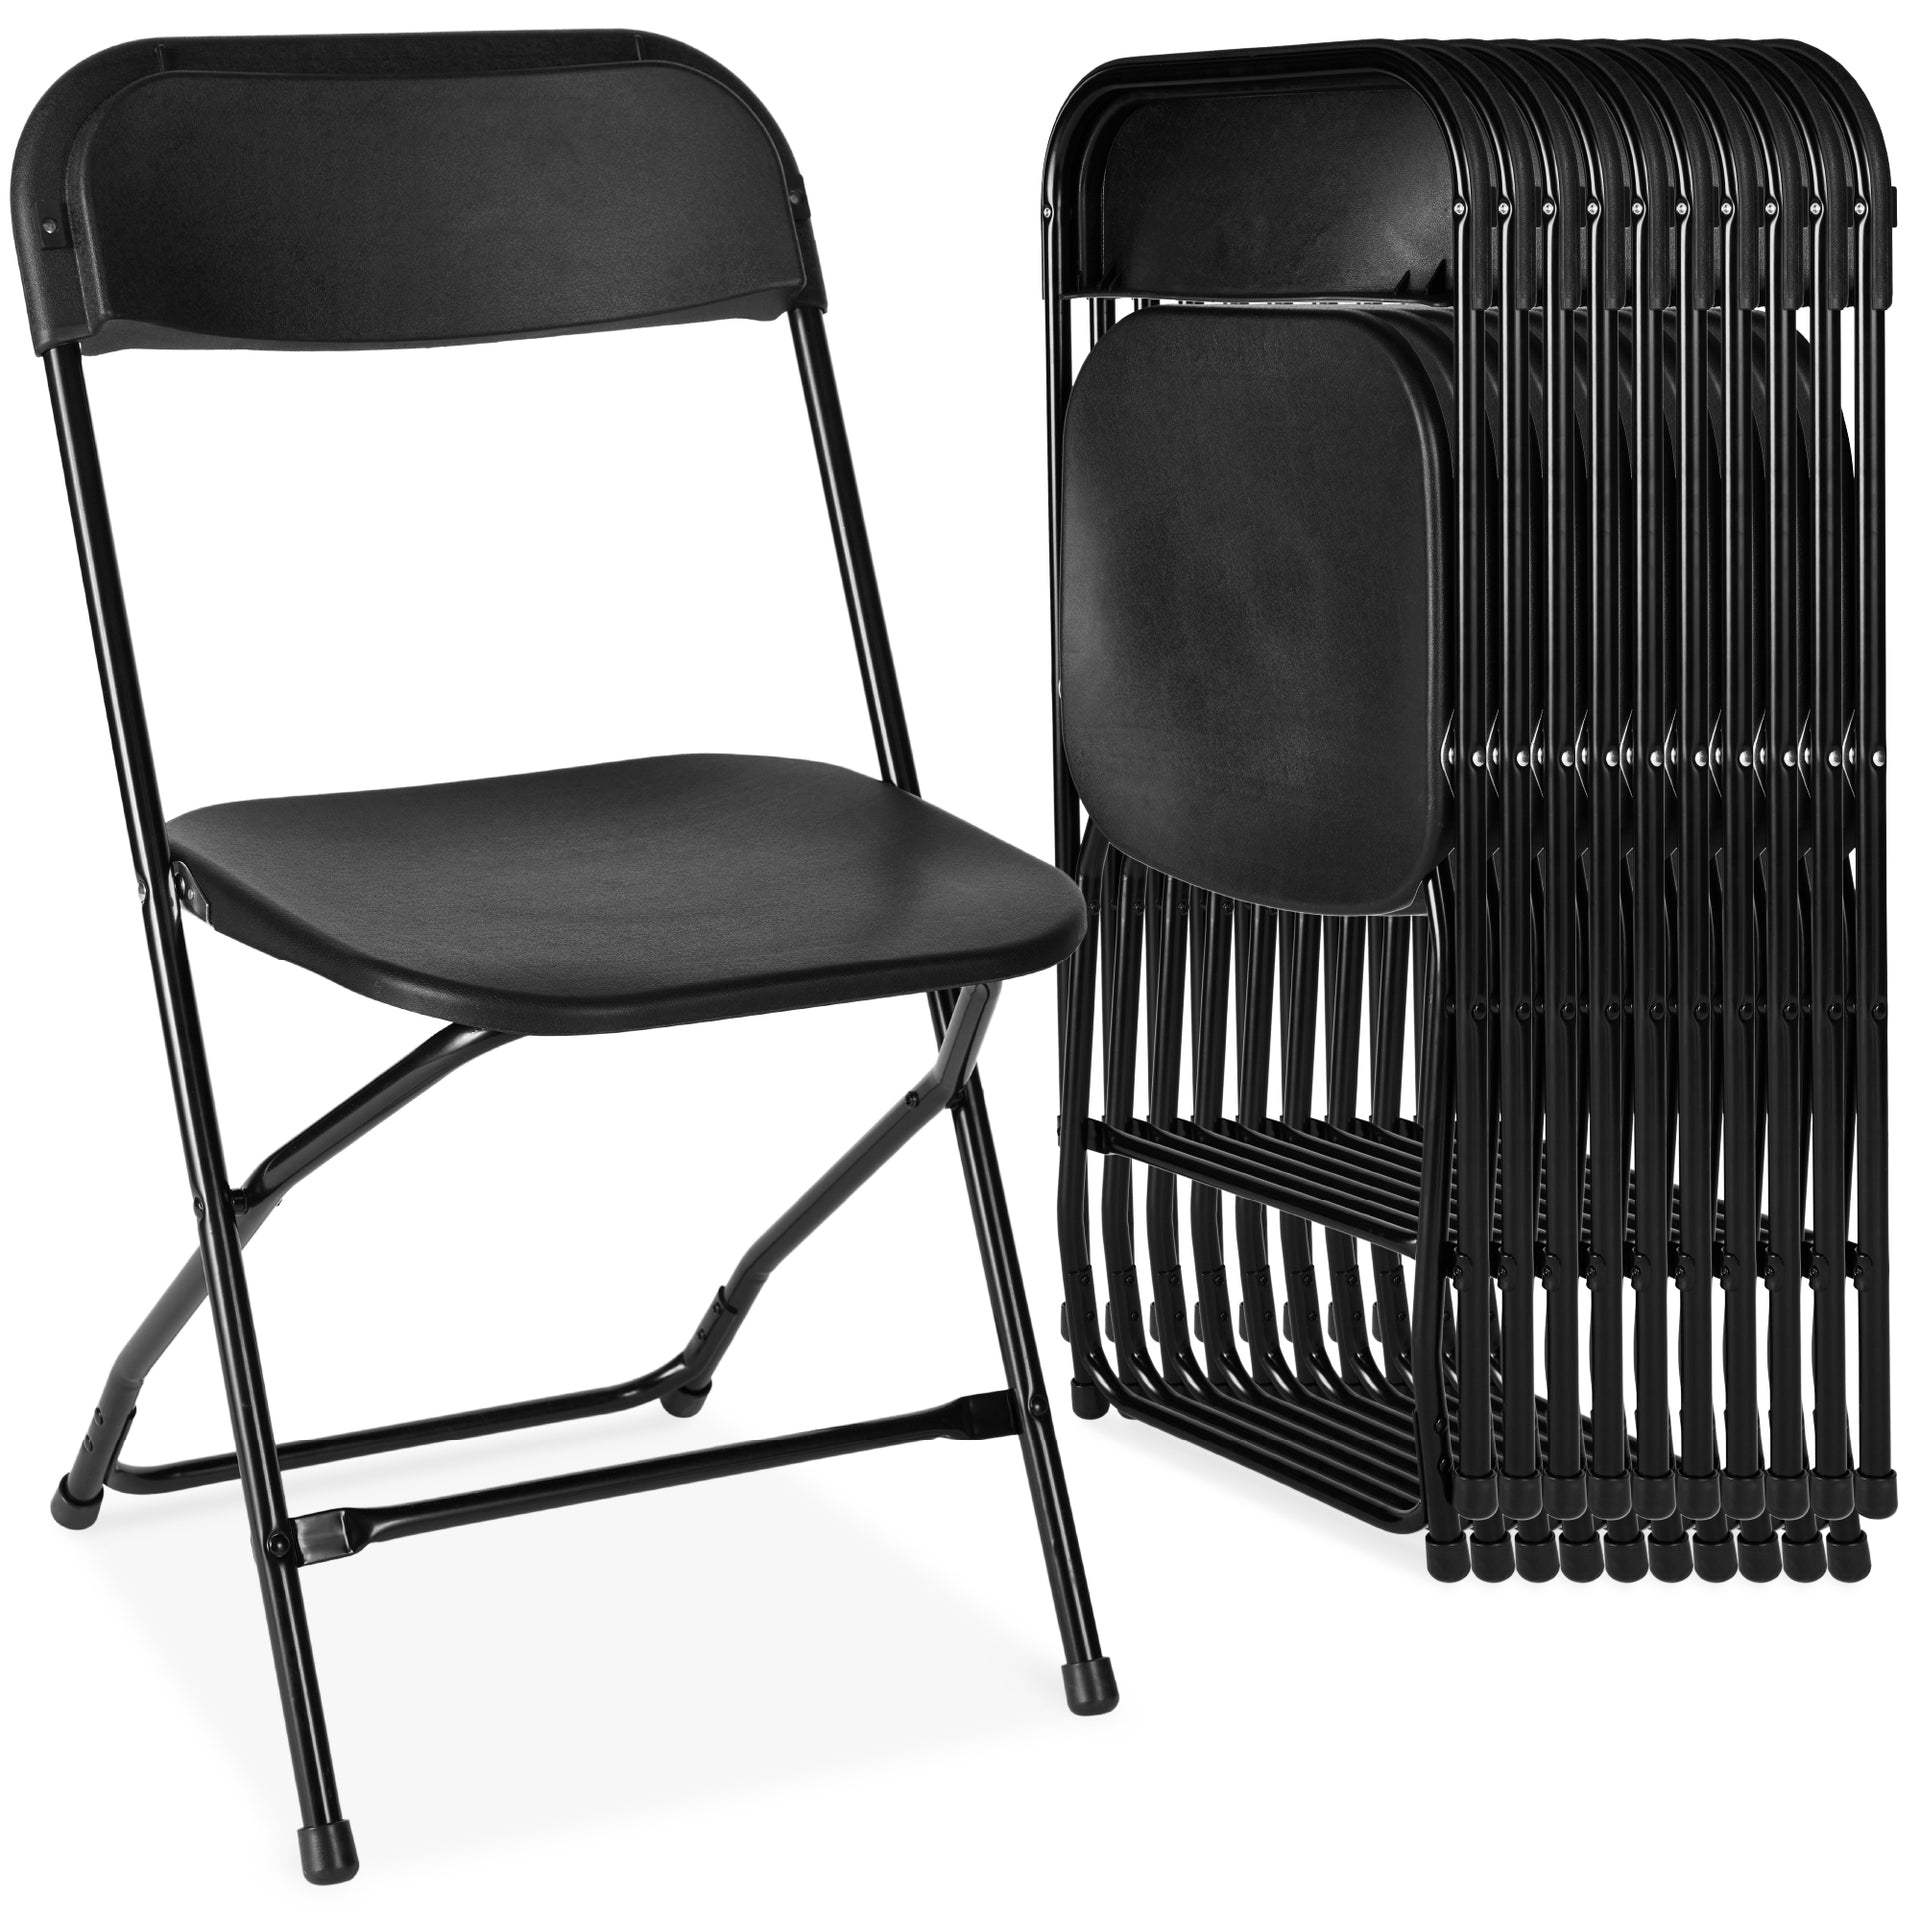 Bestsellers: The most popular items in Folding Chairs